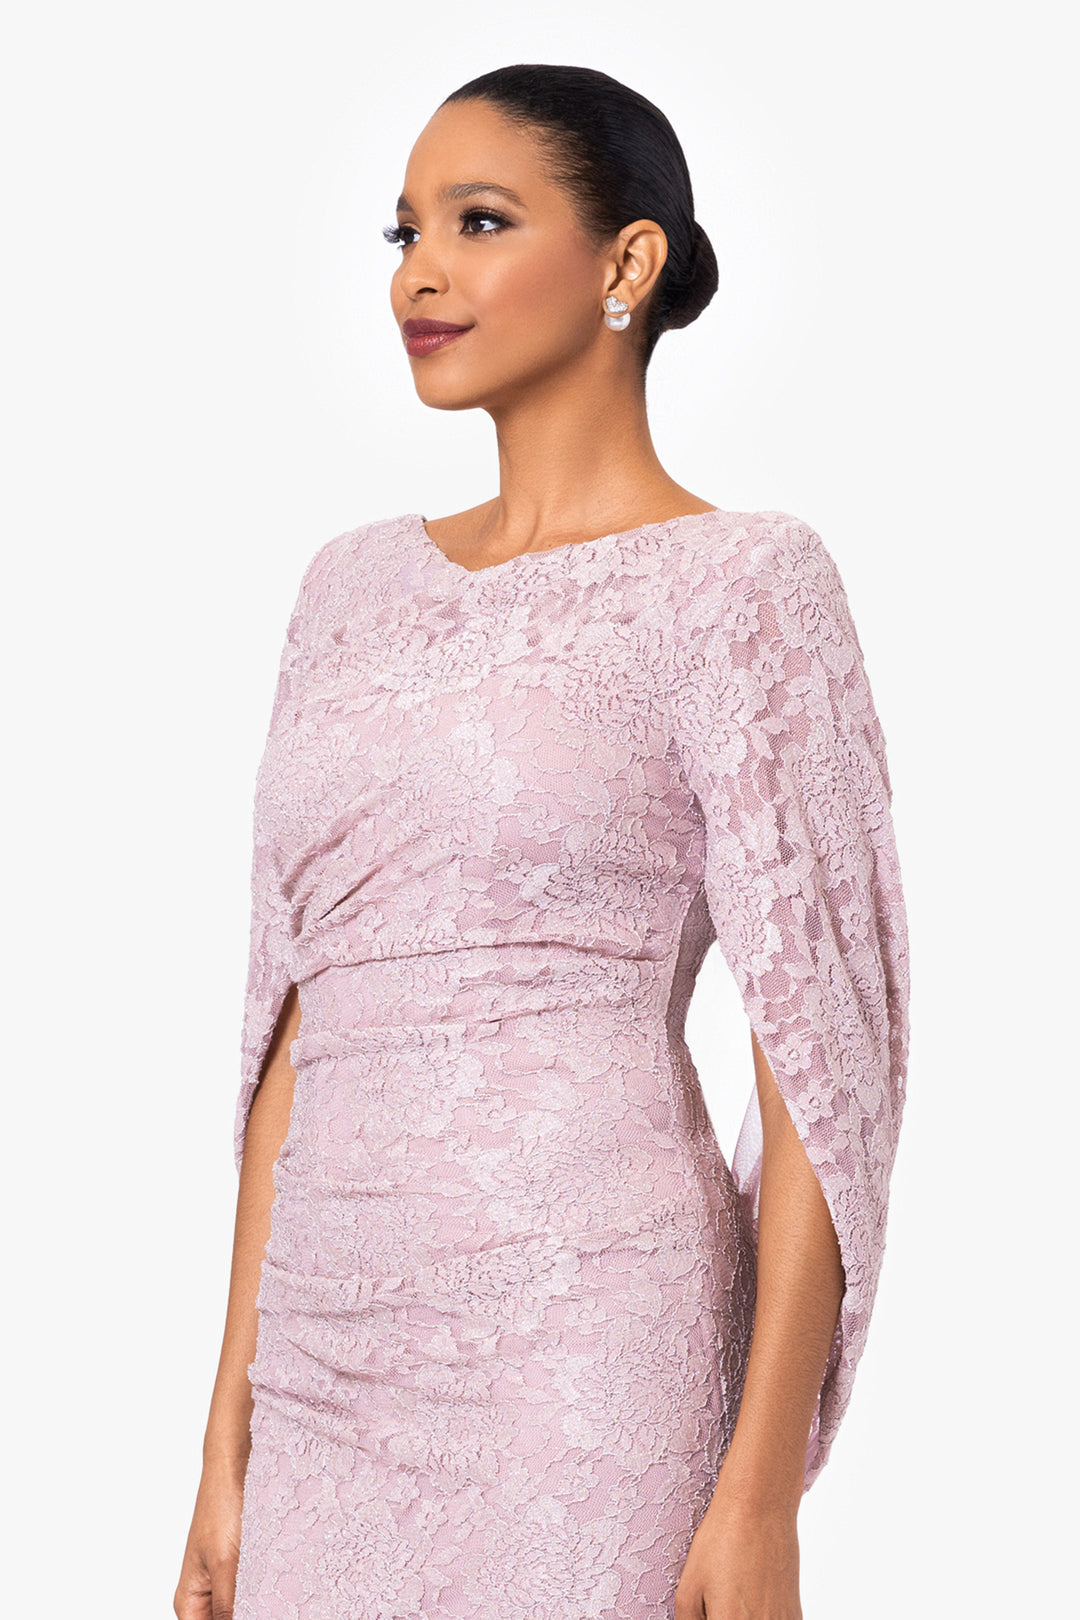 "Brie" Short Lace Overlay Cape Dress